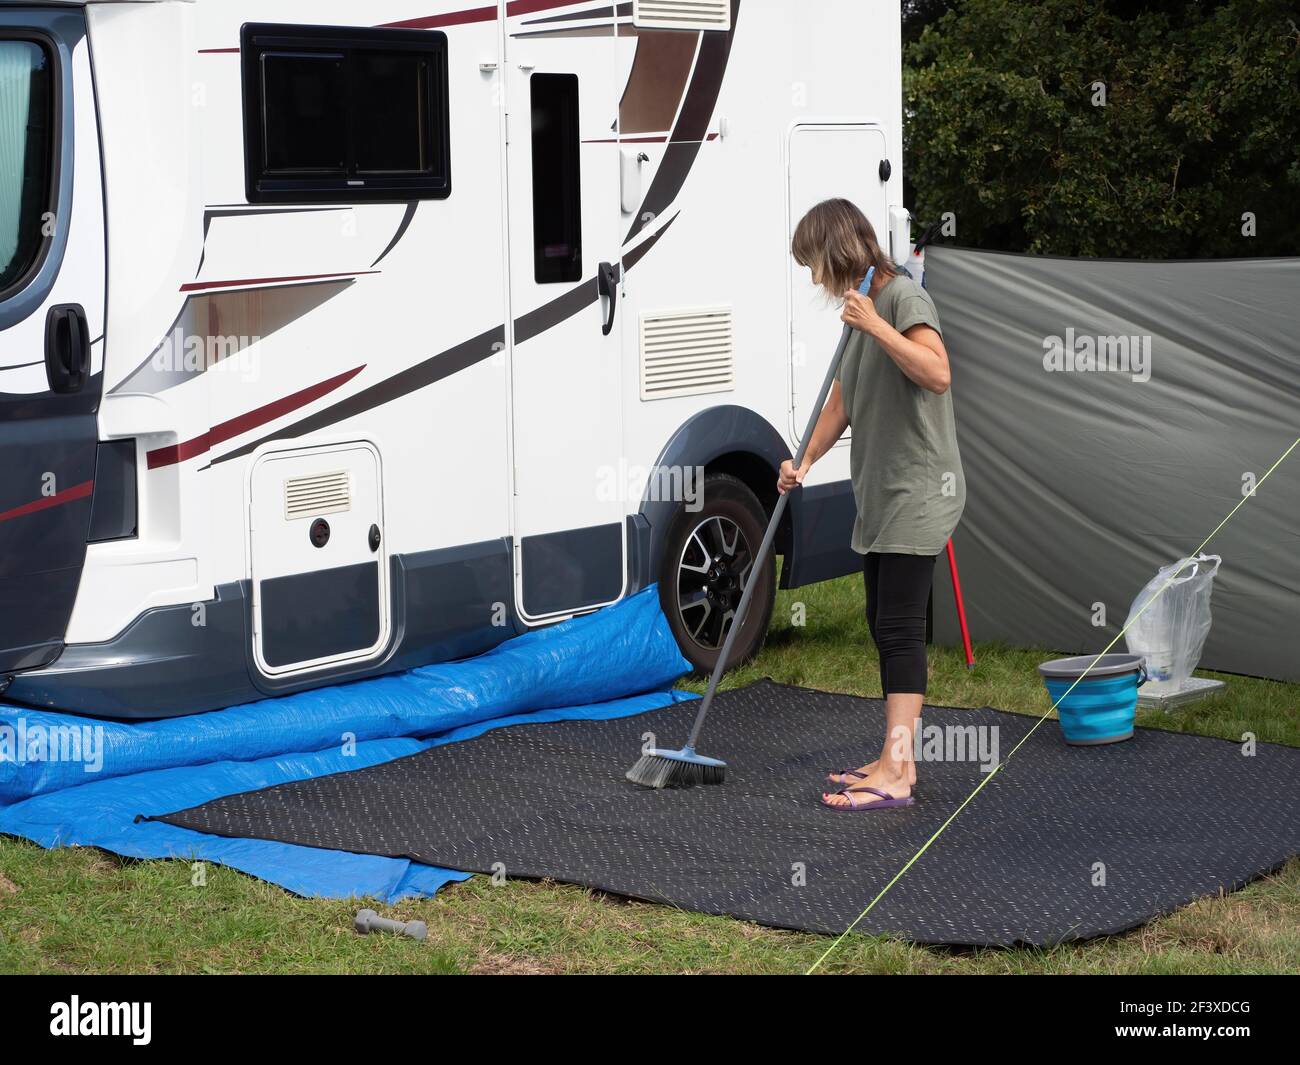 A lady motorhome owner sweeps her outdoor mat with a broom outside her recreational vehicle. A bucket and wind break are visible Stock Photo